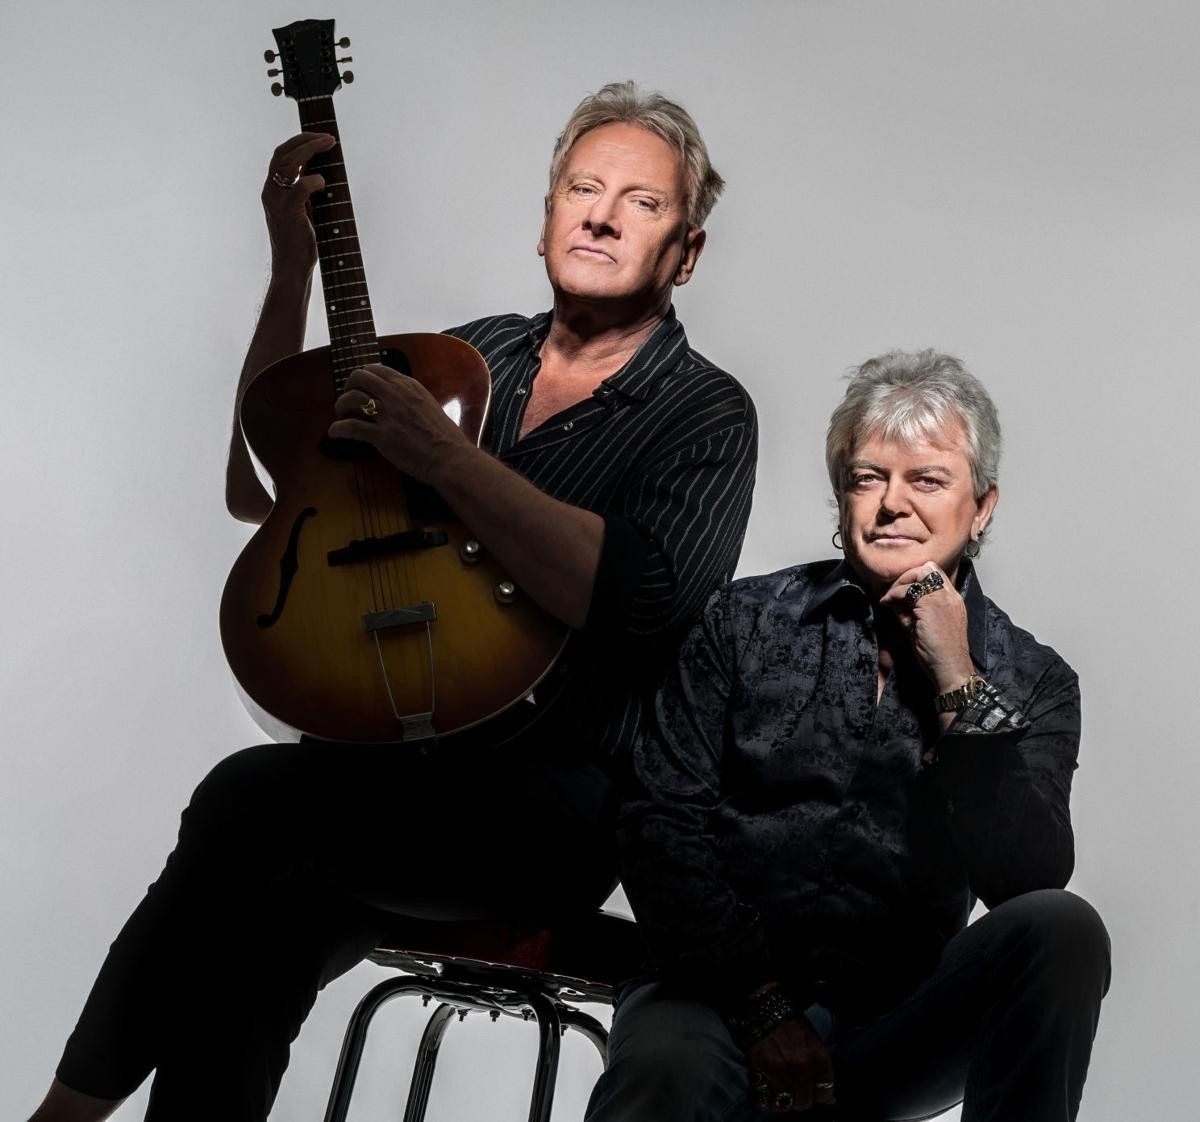 Air Supply members with a guitar for Denture Doctor